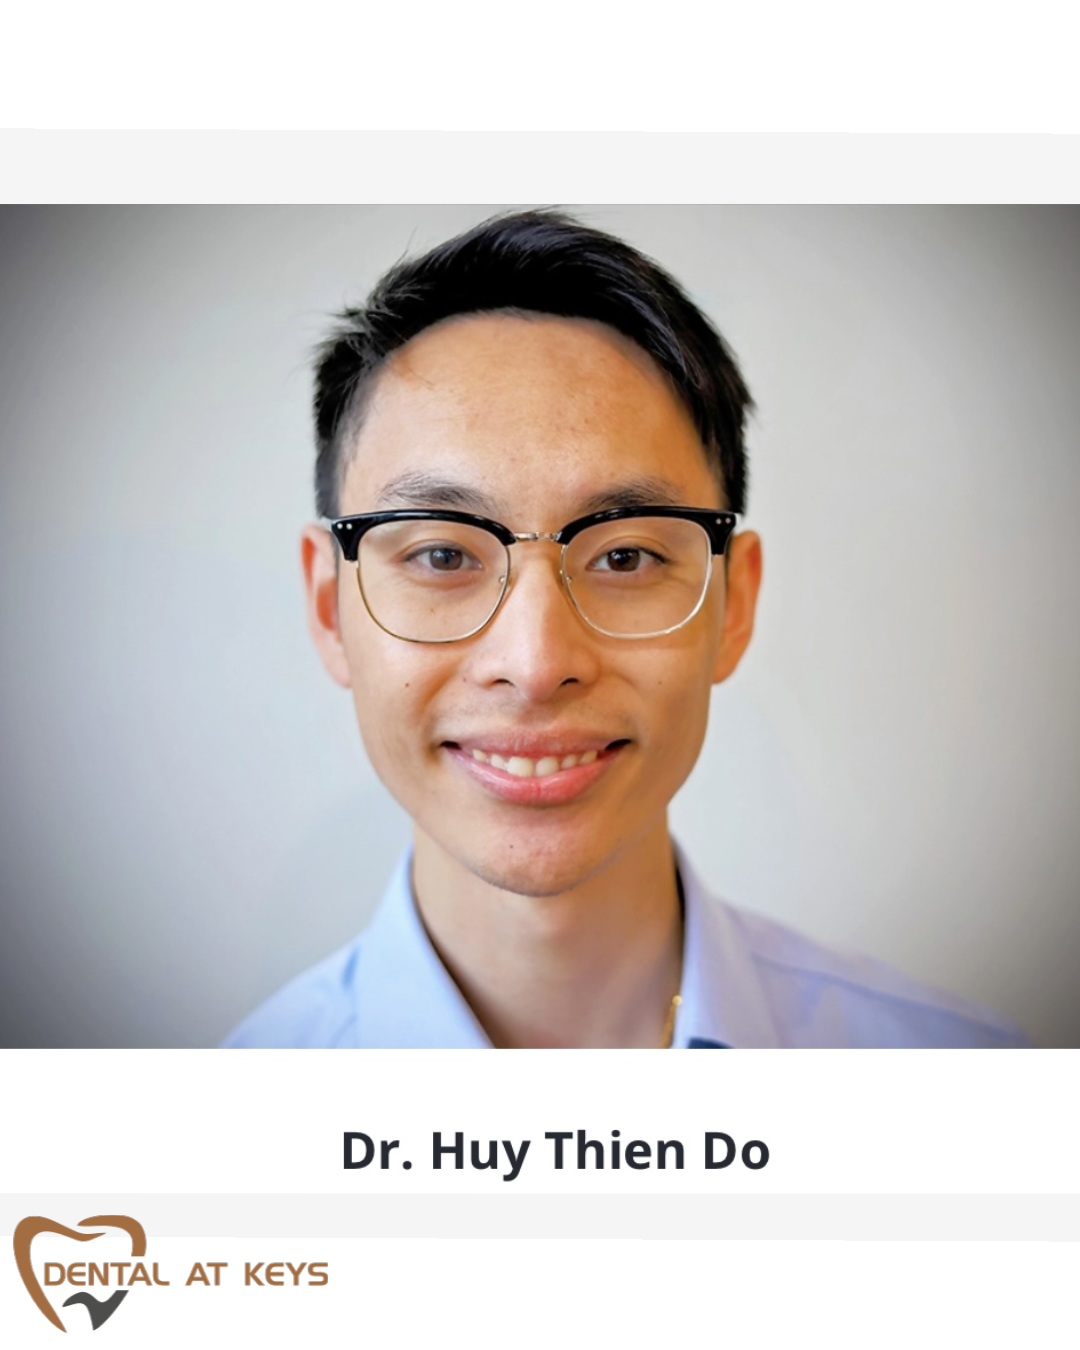 Welcome Dr. Huy